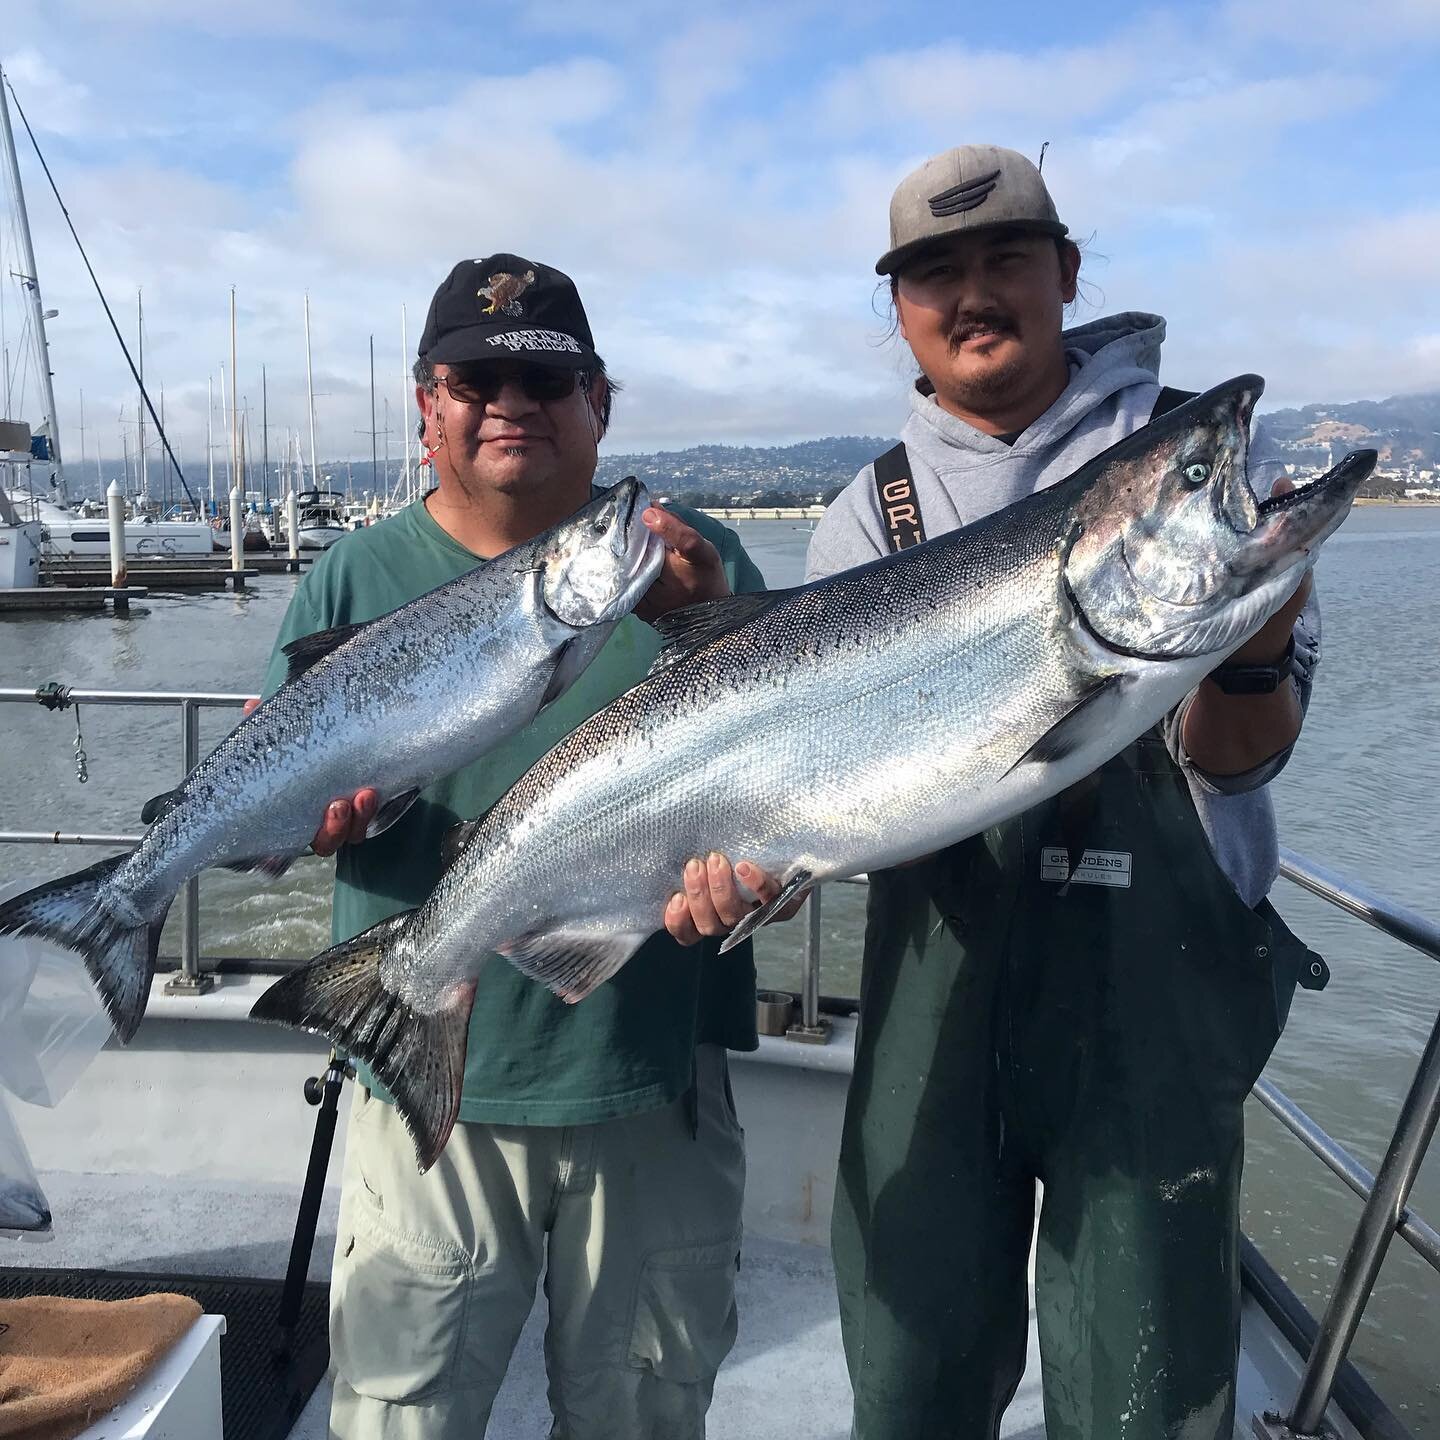 We were all over the ocean today! Finally found some fish that wanted to bite! Our 14 anglers ended the day with 23 salmon to 30 lbs! I want to thank the people for fishing hard and not giving up! #fishemeryville #pacificpearlcharters #salmon #thisis